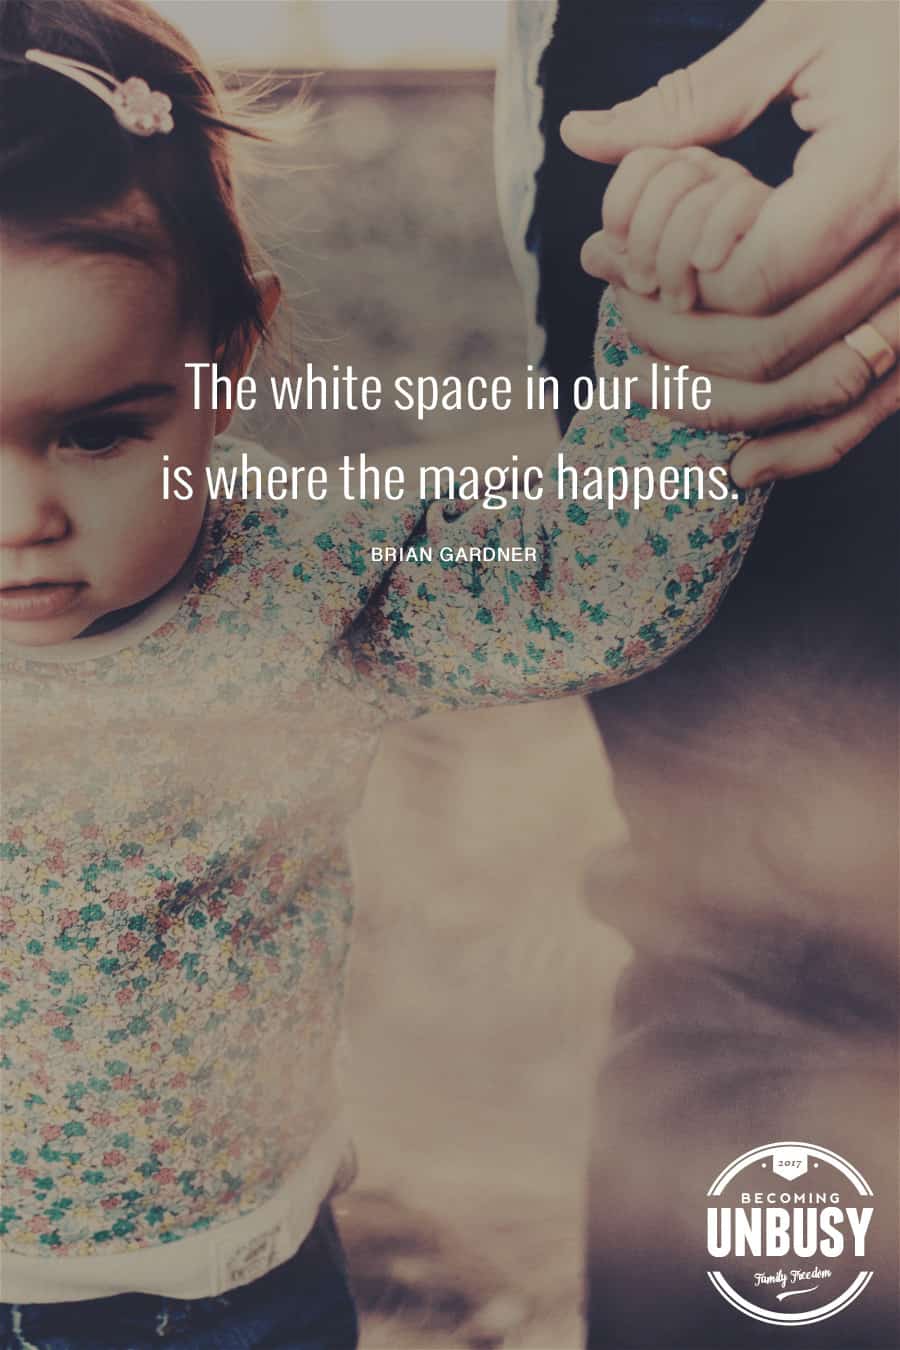 The white space in our life is where the magic happens. - Brian Garner #NoSidebar #Quote #BecomingUnBusy *Loving this post on how white space at home will create white space in your life